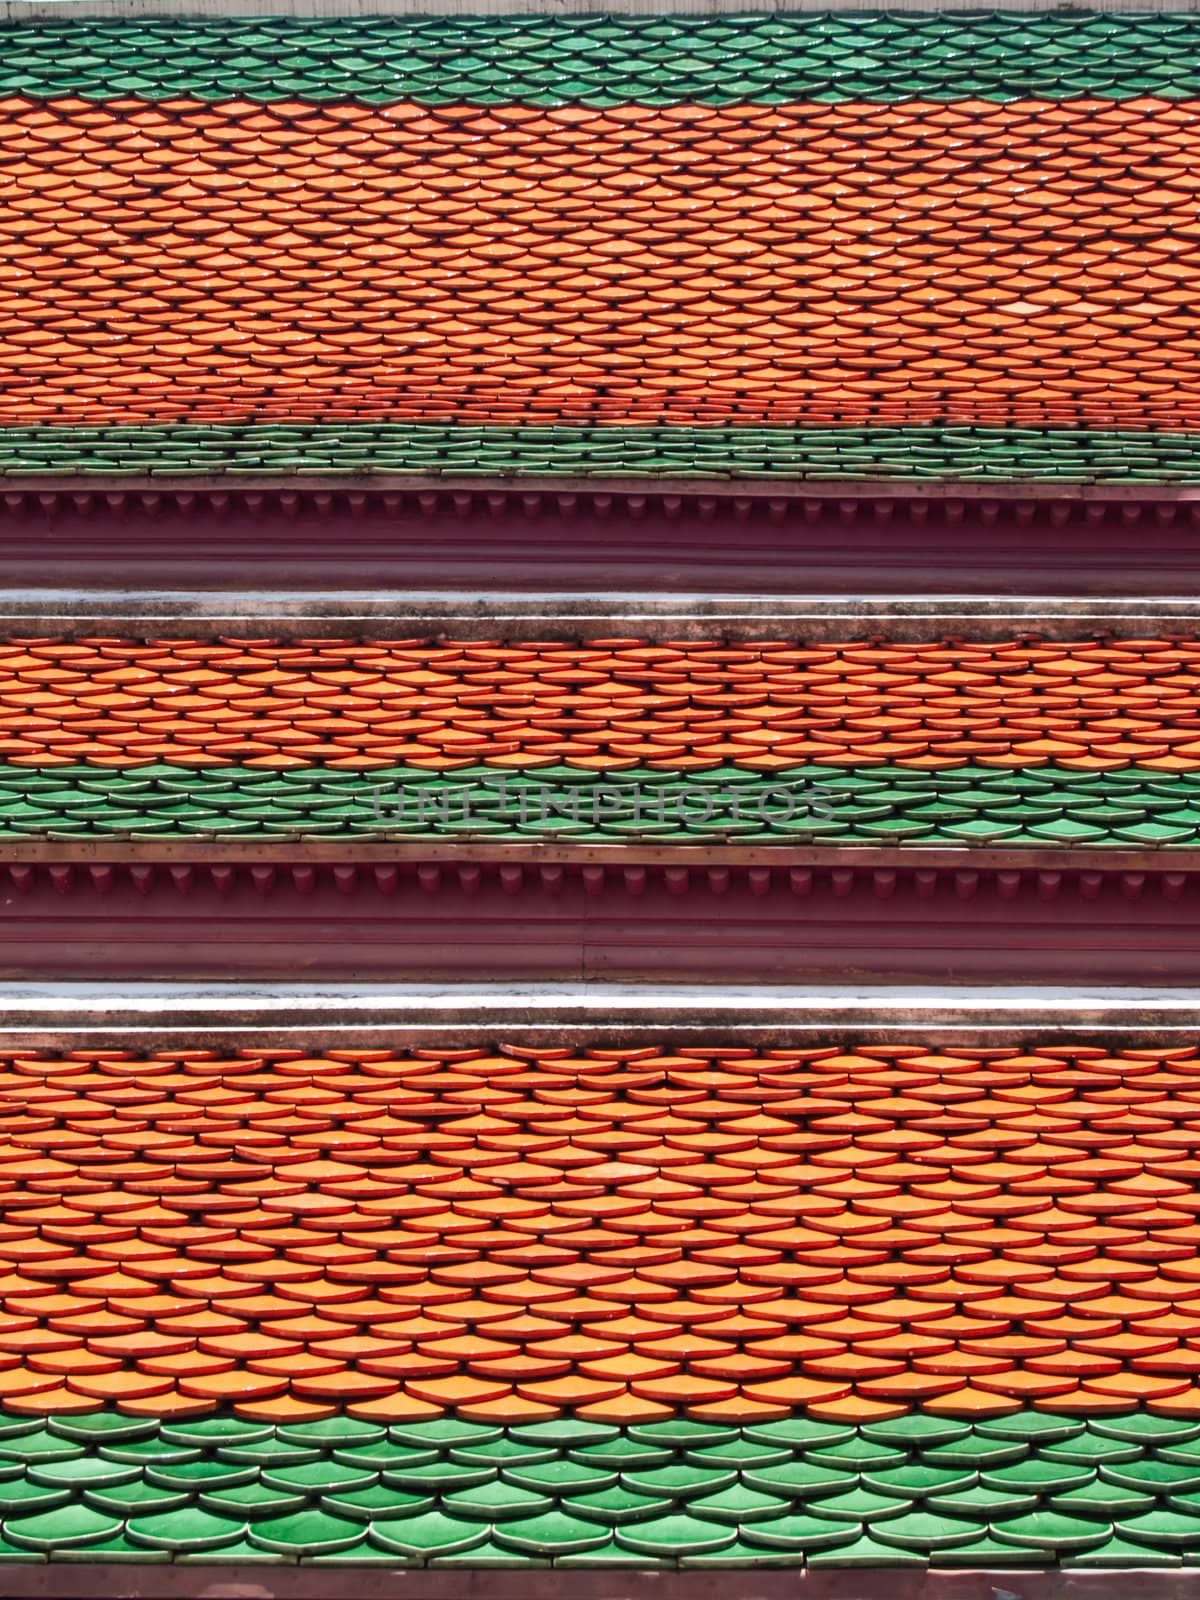 Roof of Galleries in Temple of The Emerald Buddha (Wat Phra Kaew), Bangkok, Thailand